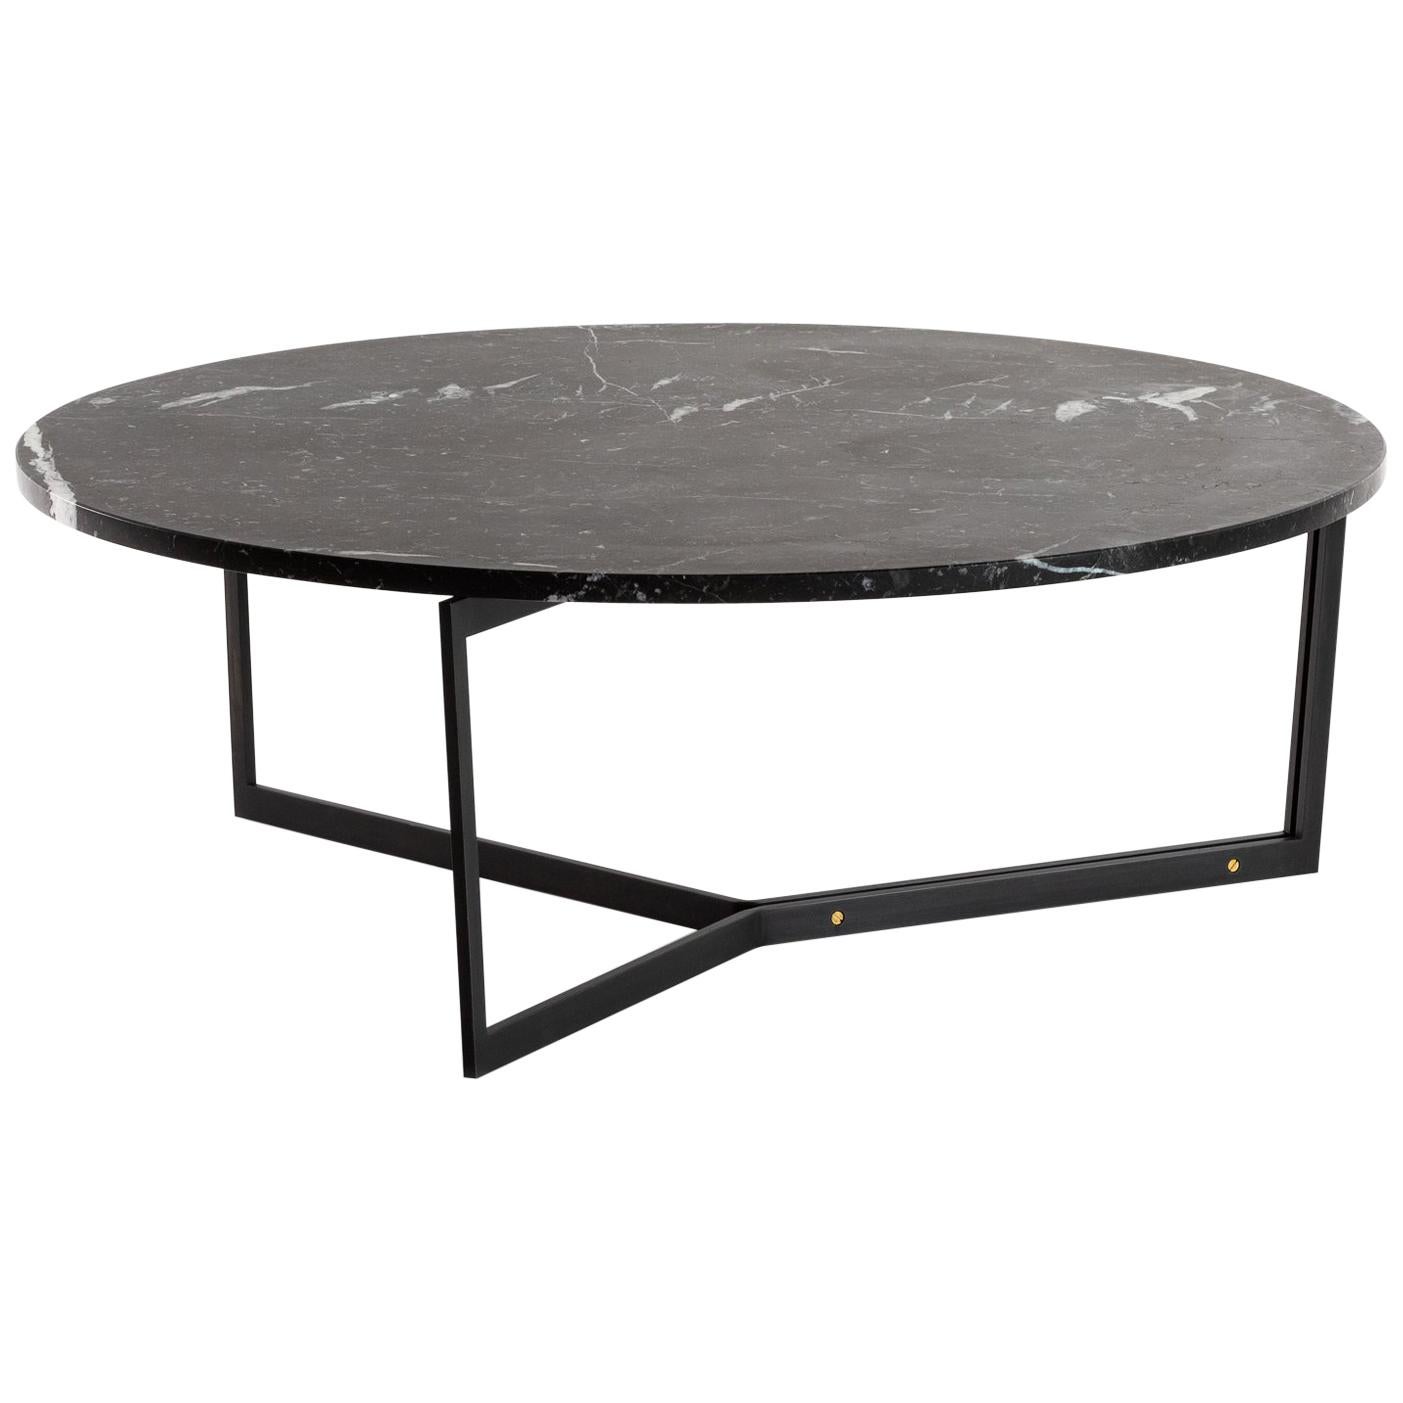 AT14 Round Coffee Table with Blackened Steel Base and Marble Top